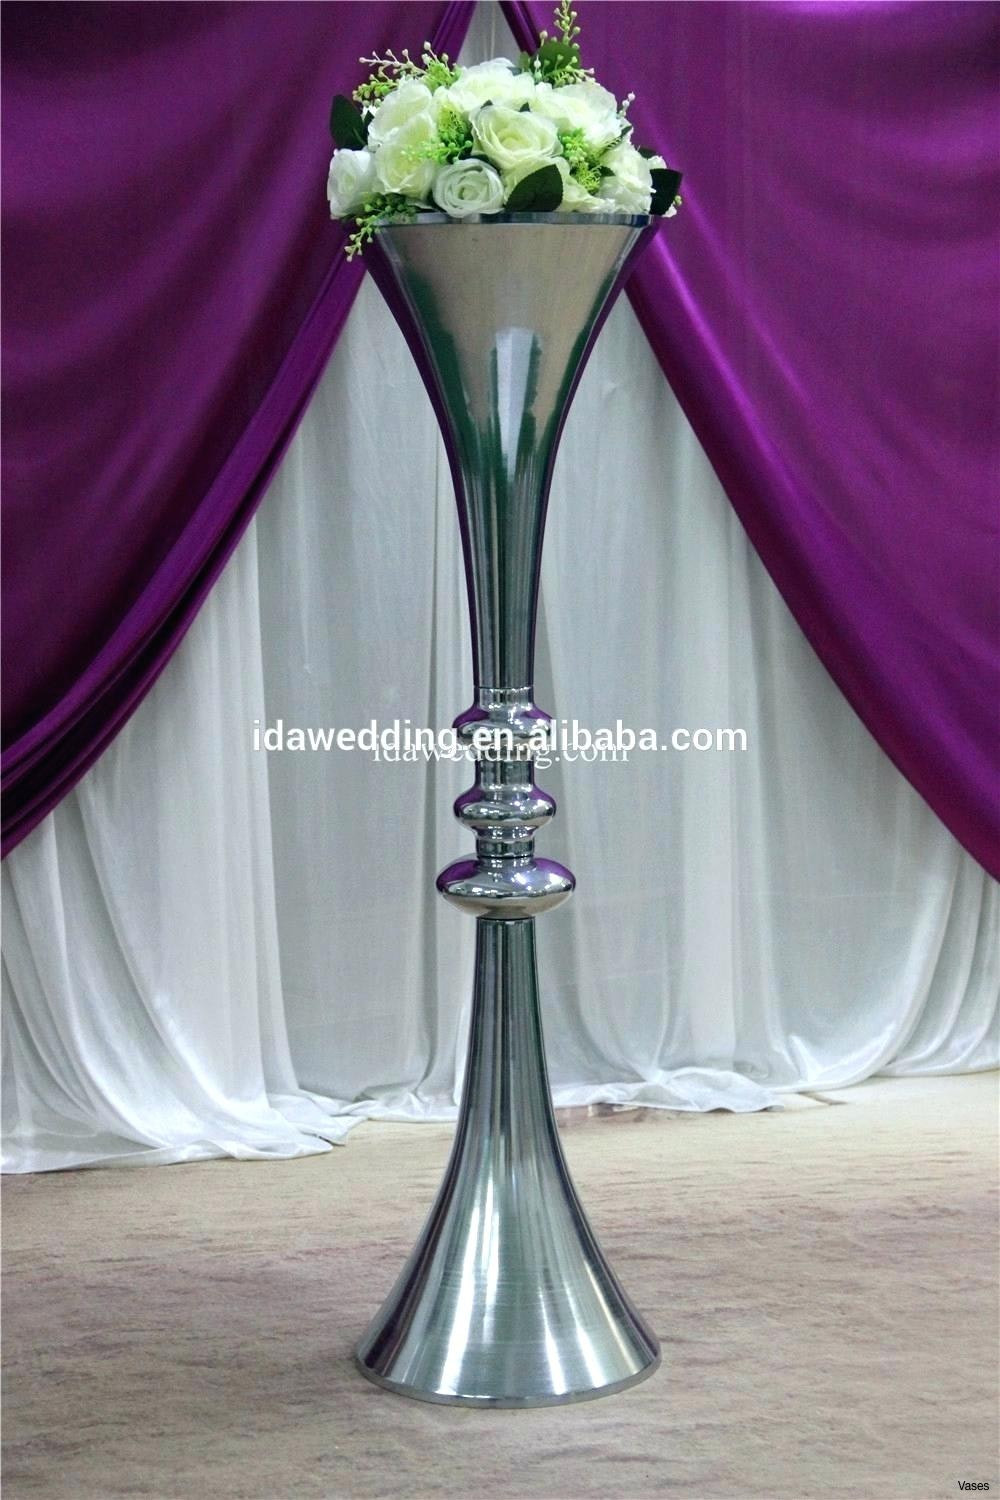 22 Stunning wholesale Bud Vases Bulk 2024 free download wholesale bud vases bulk of bulk vases wholesale prices cheap buy cylinder ukh for uk i 16d 3 5 in bulk vases wholesale prices cheap buy cylinder ukh for uk i 16d 3 5 at sunflower a